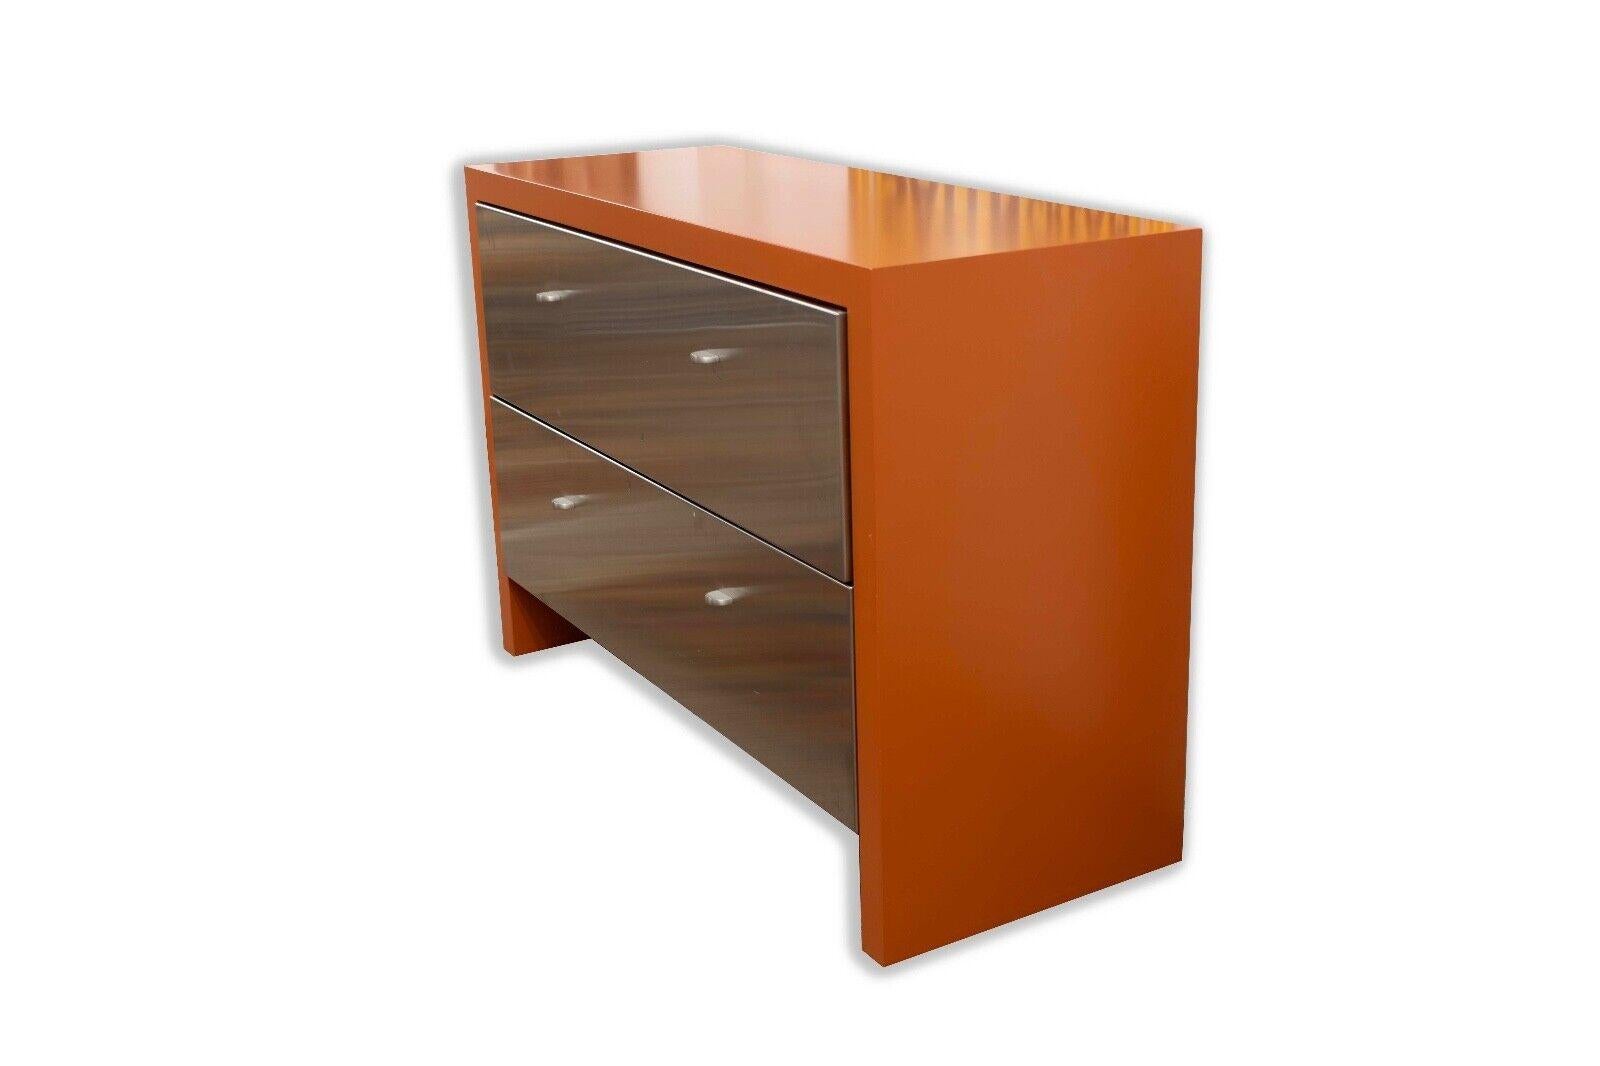 Contemporary Modern Stainless Steel and Orange Lacquer 2 Drawer Cabinet Dresser In Good Condition For Sale In Keego Harbor, MI